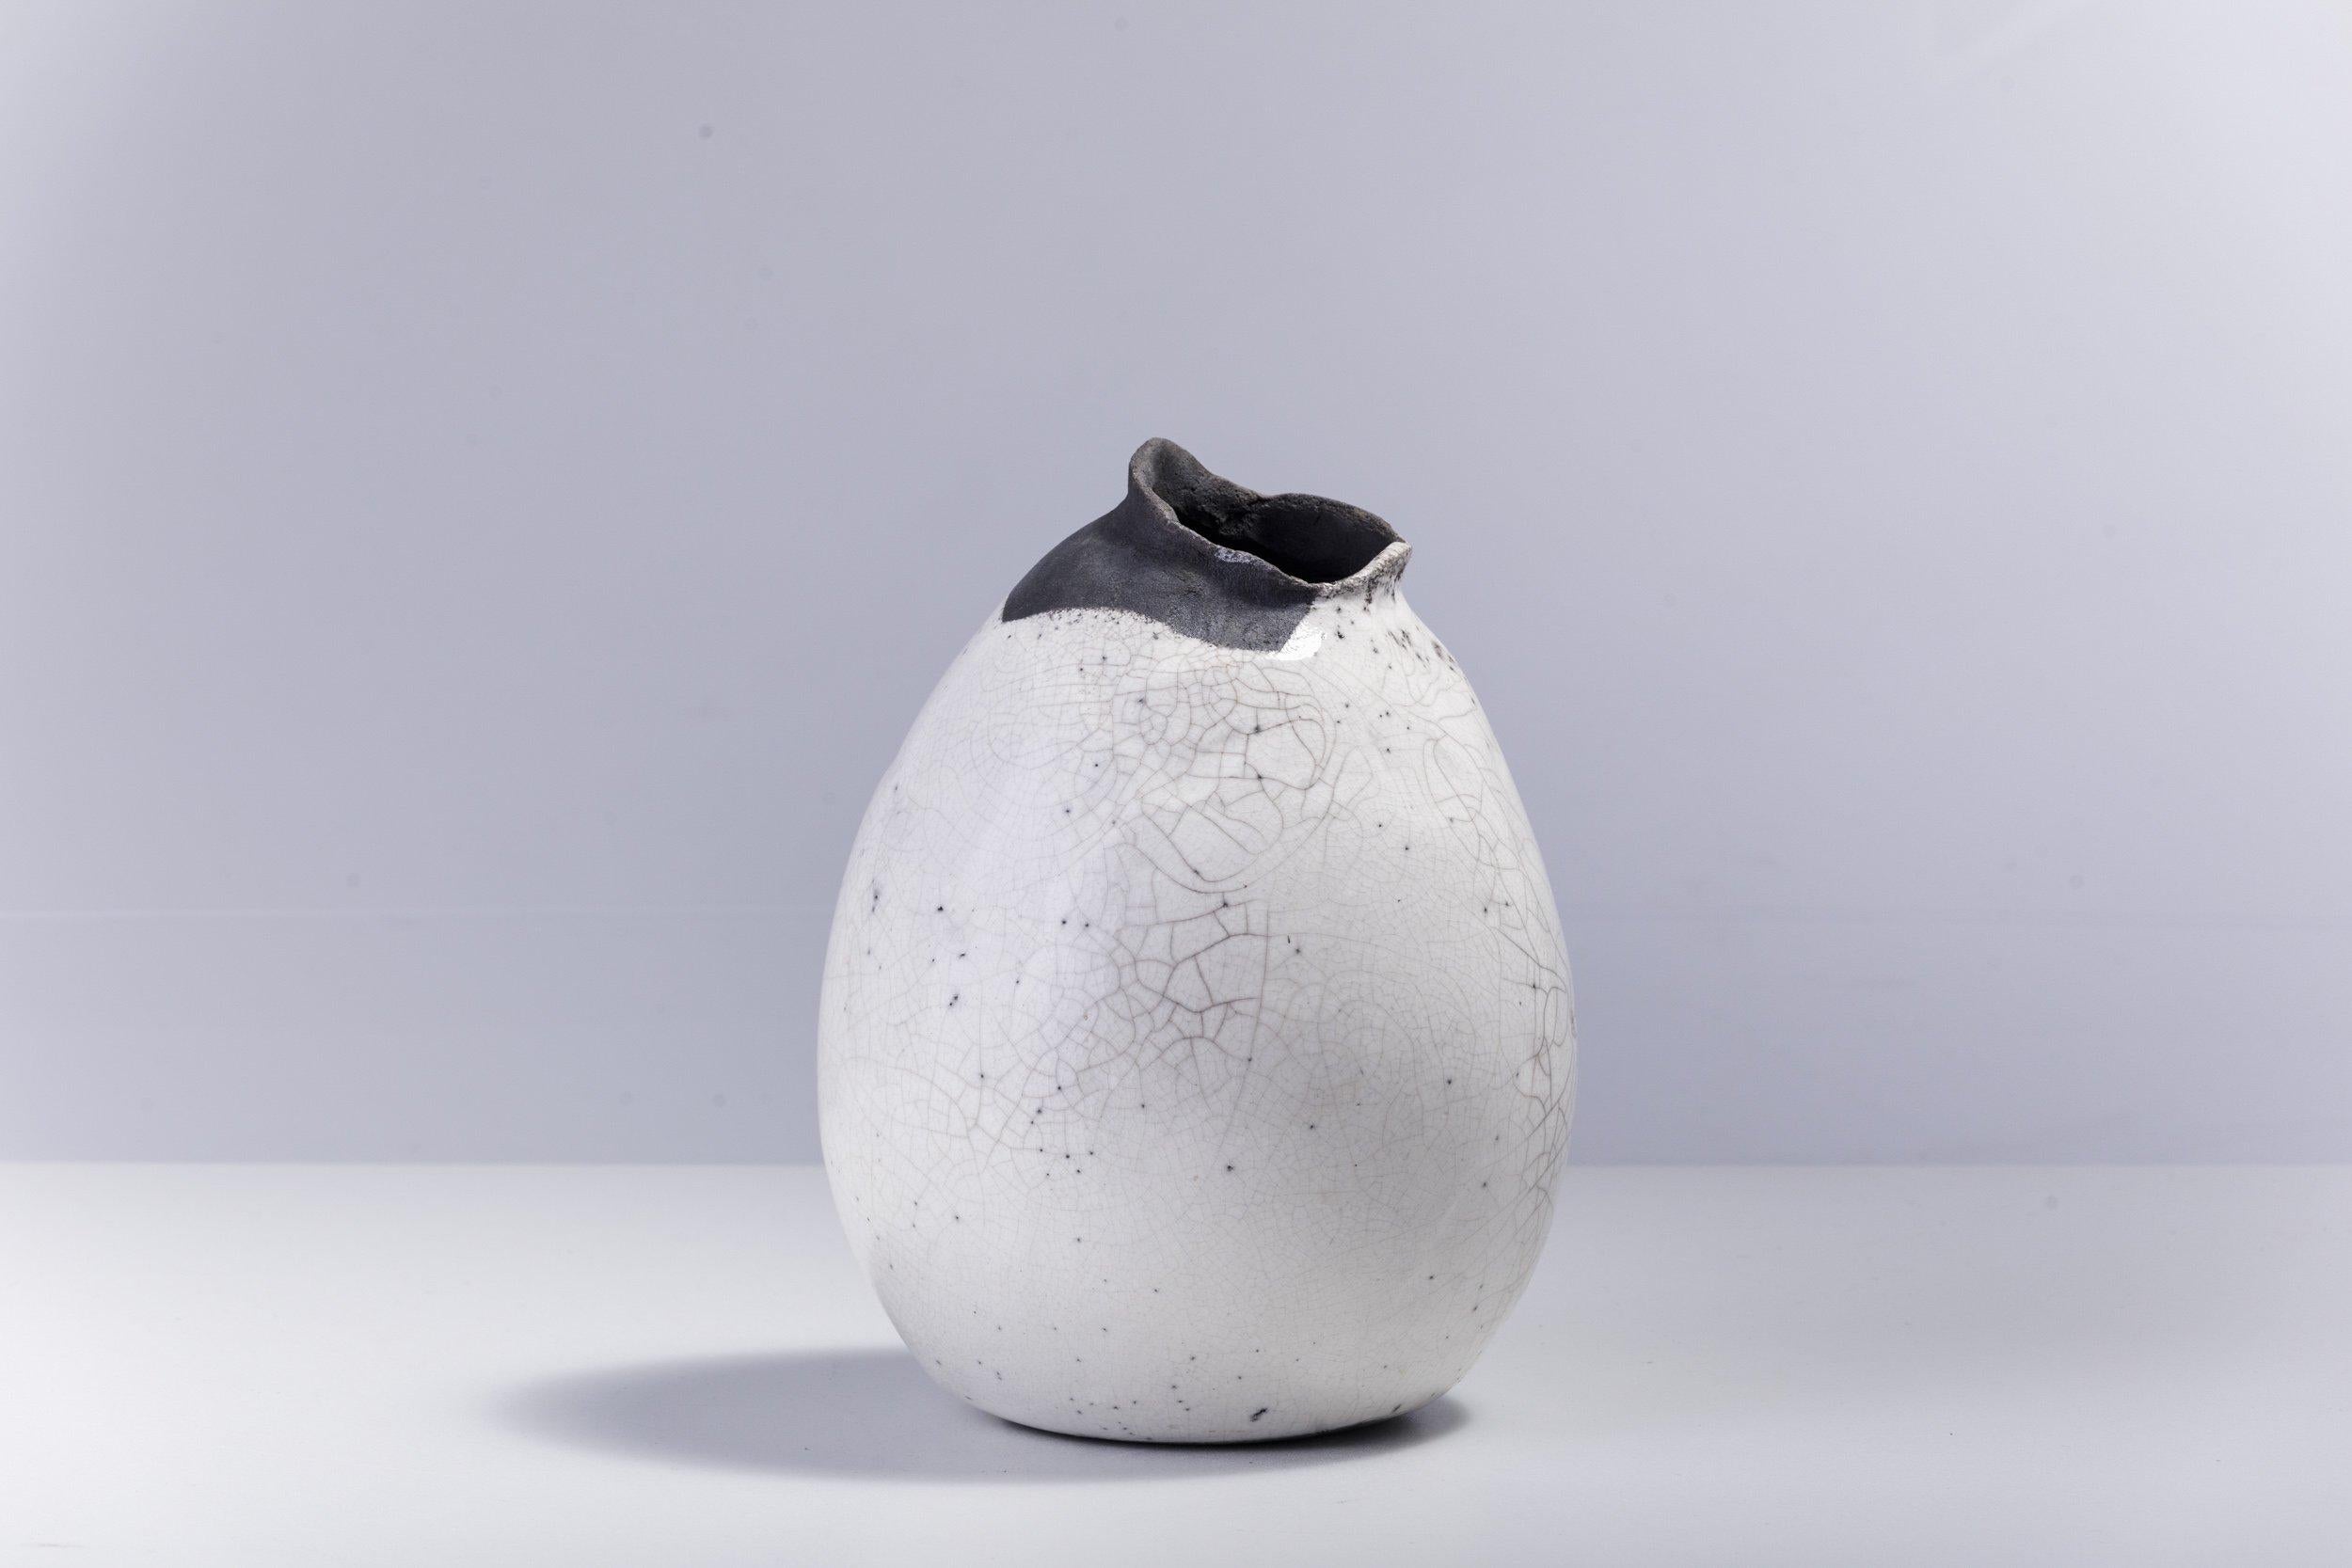 Impermanenza Black

A unique testament to artisanal craftsmanship, this gorgeous sculptural vase is distinguished by an uneven, jagged, and black-colored rim result of the stunning Raku firing technique of Japanese origin. Its bulging ceramic